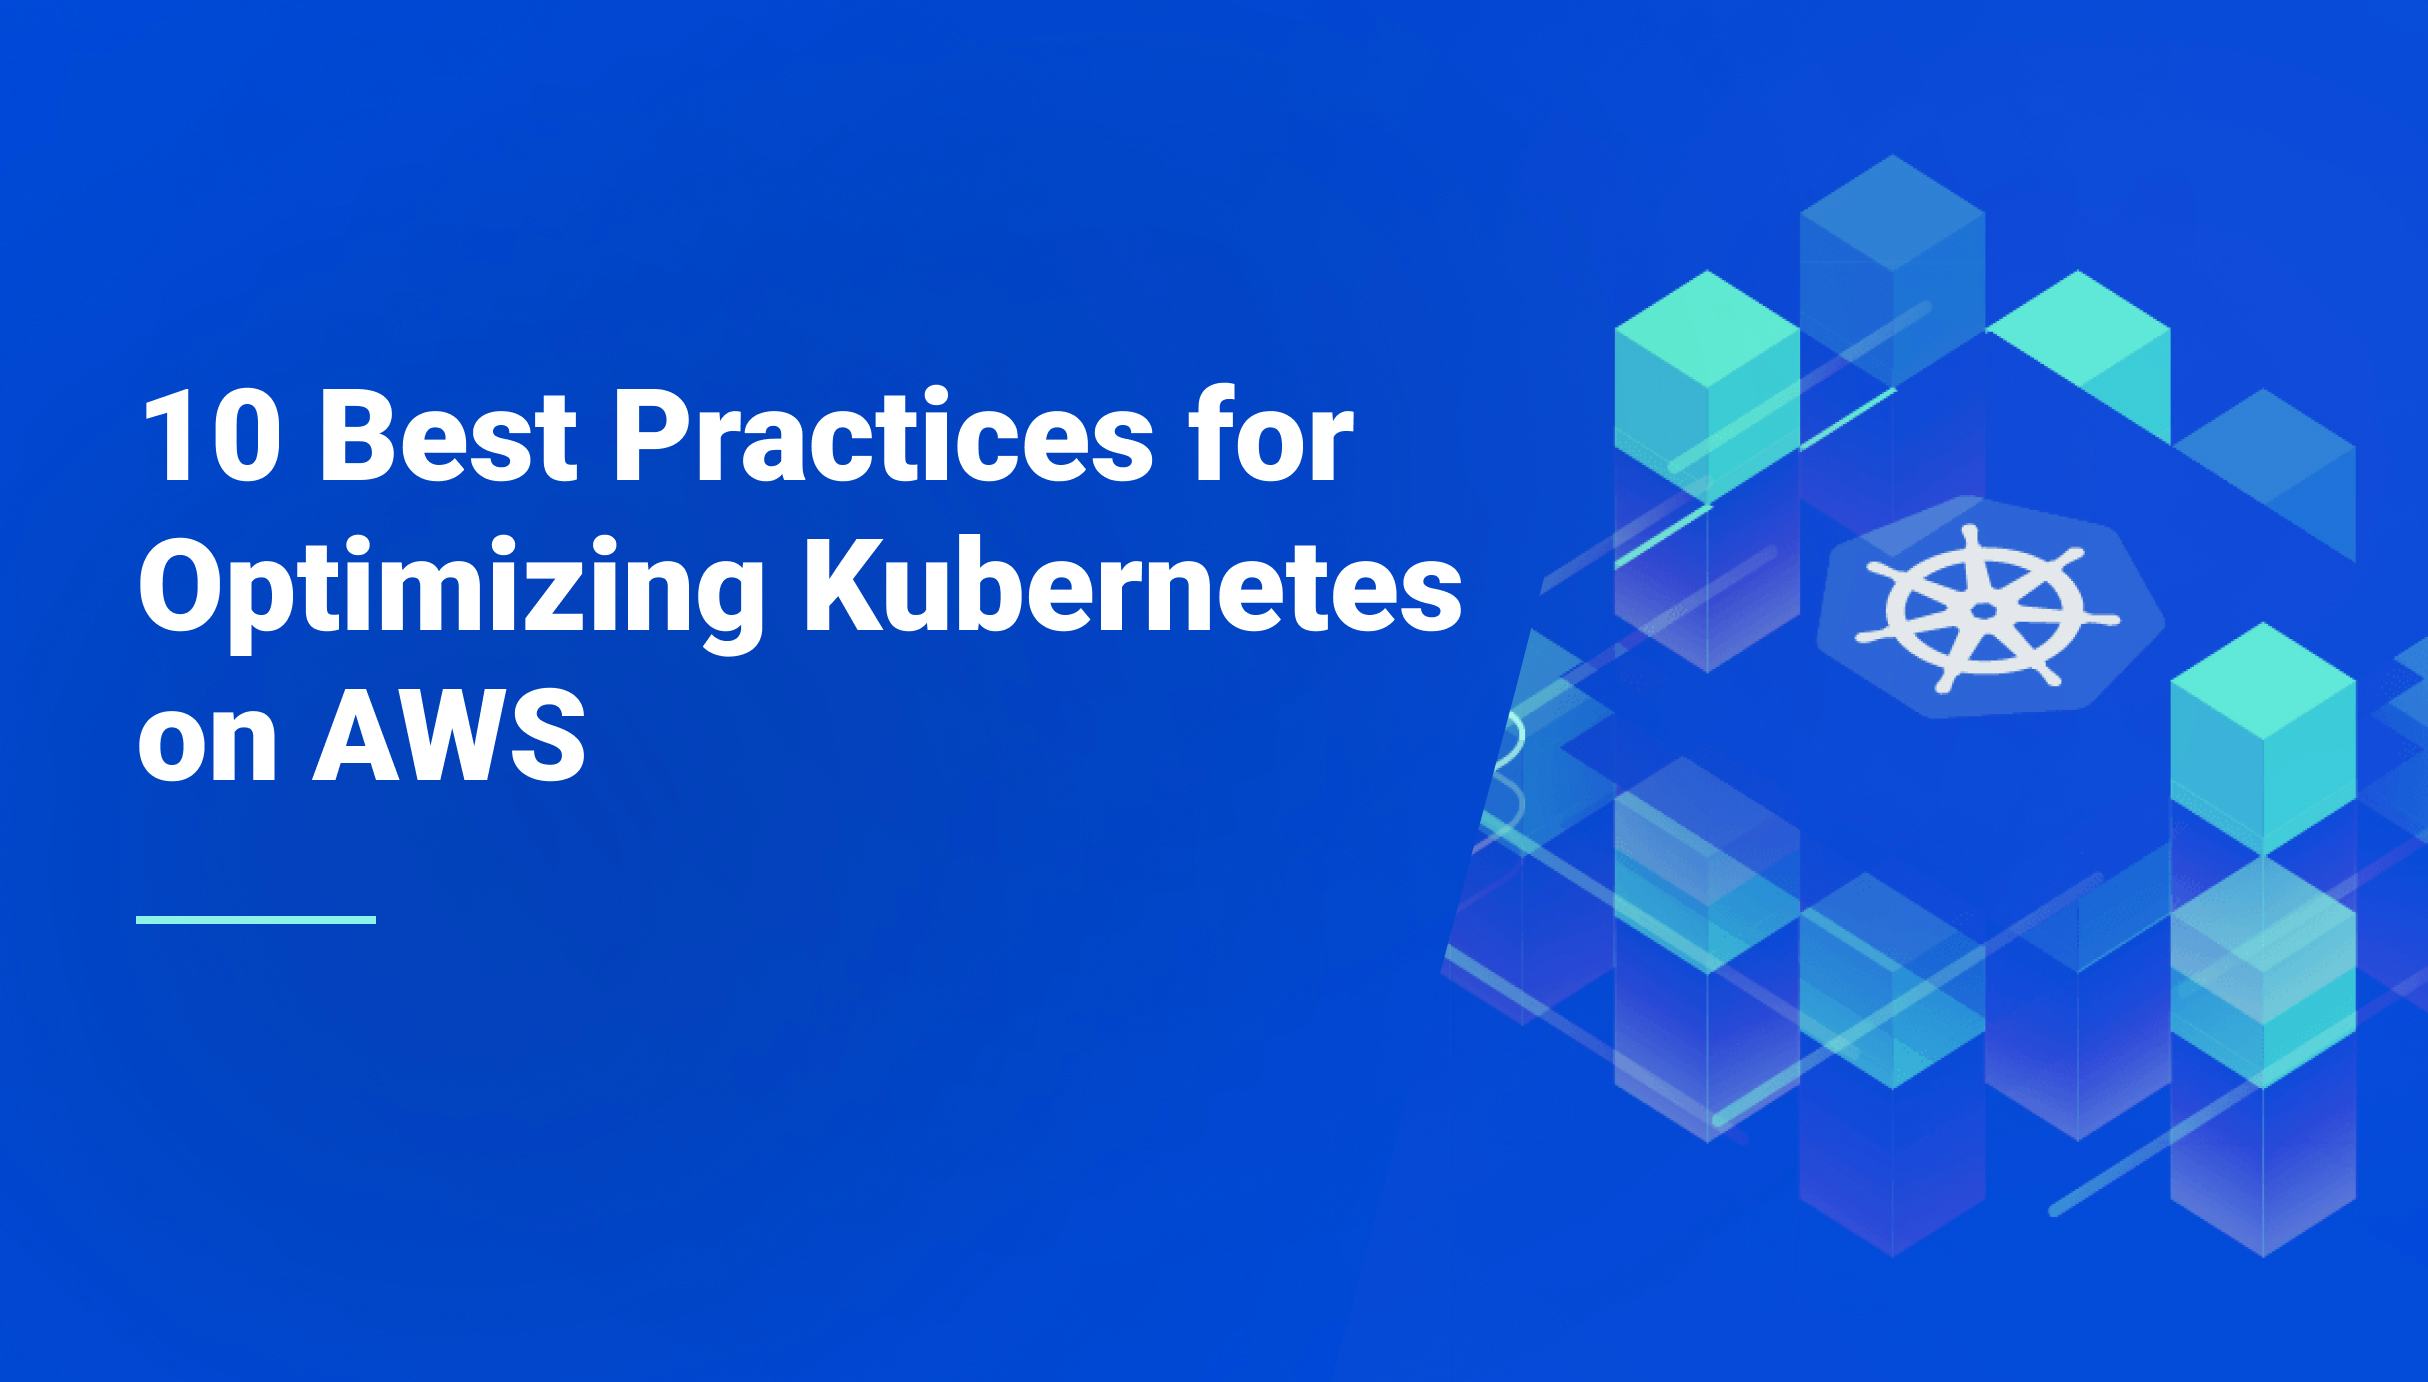 10 Best Practices for Optimizing Kubernetes on AWS - Qovery